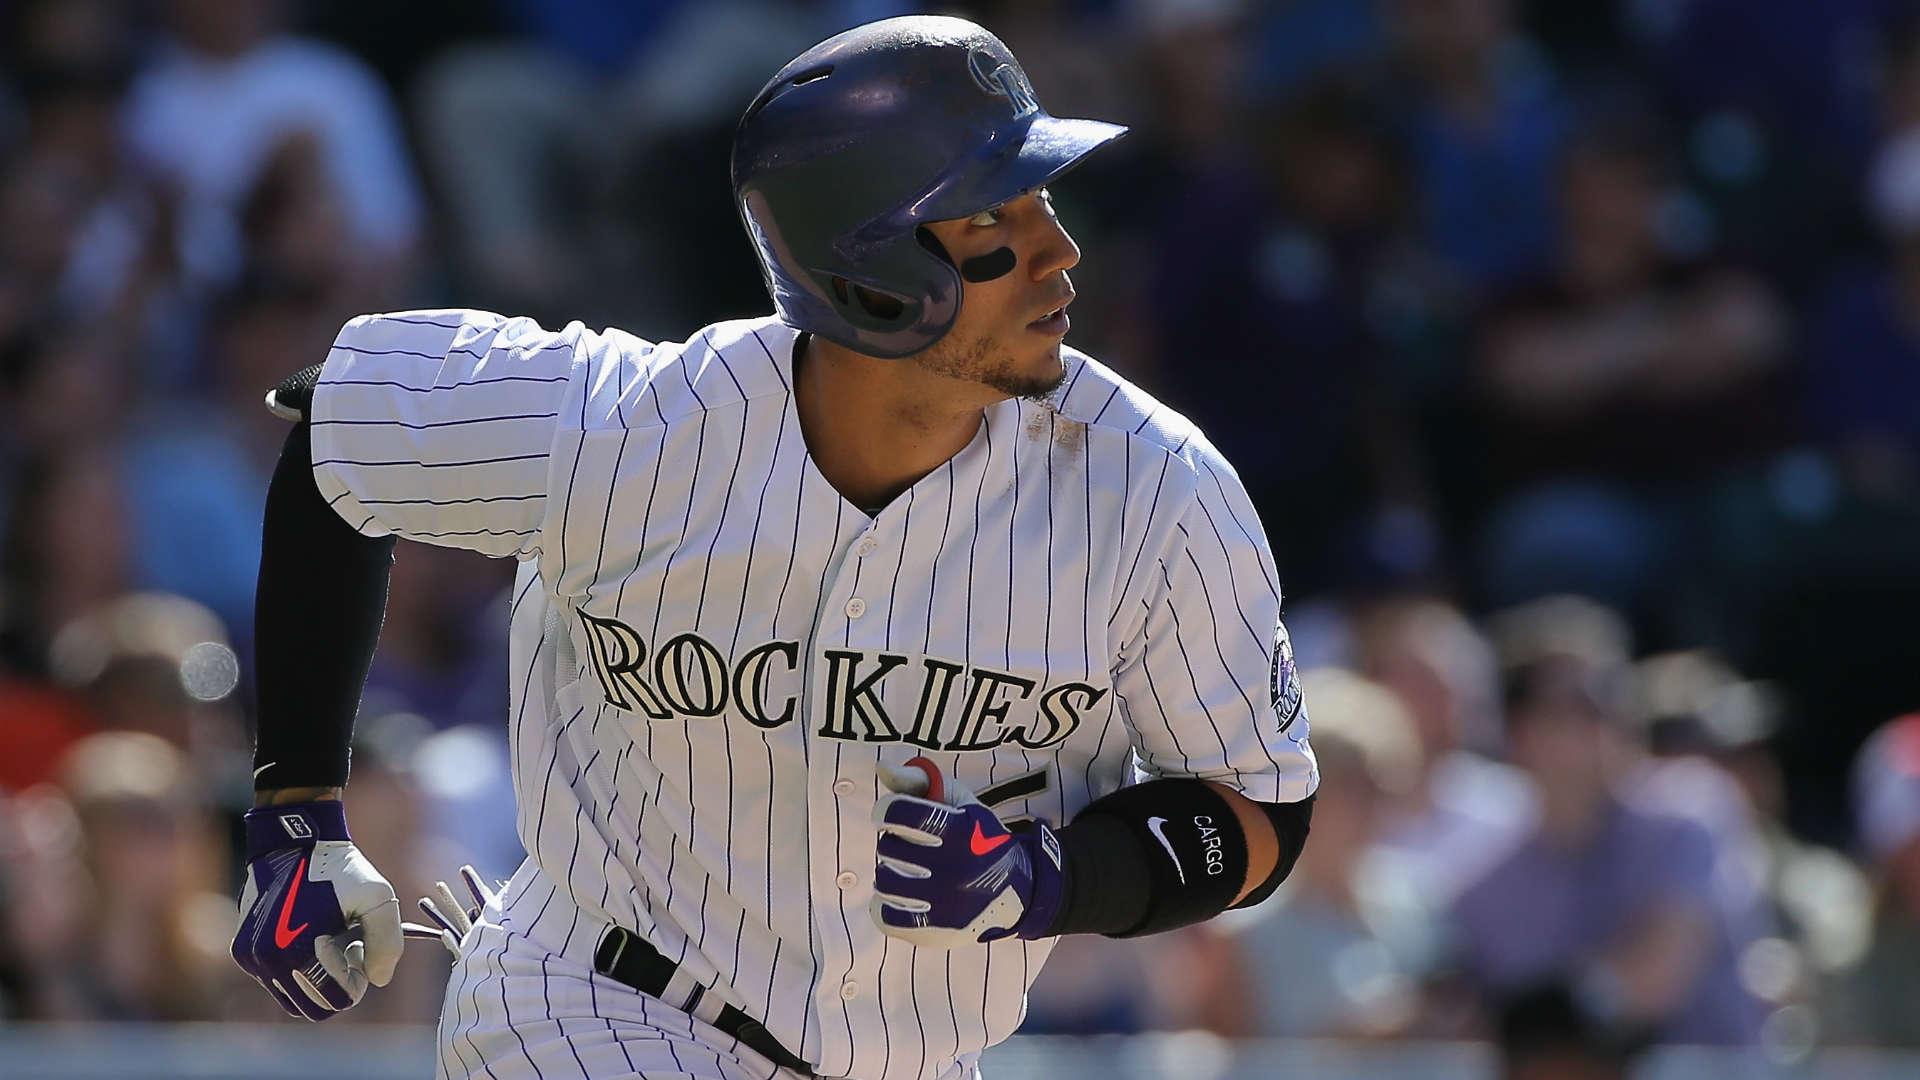 Rockies Place Carlos Gonzalez On 10 Day DL With Shoulder